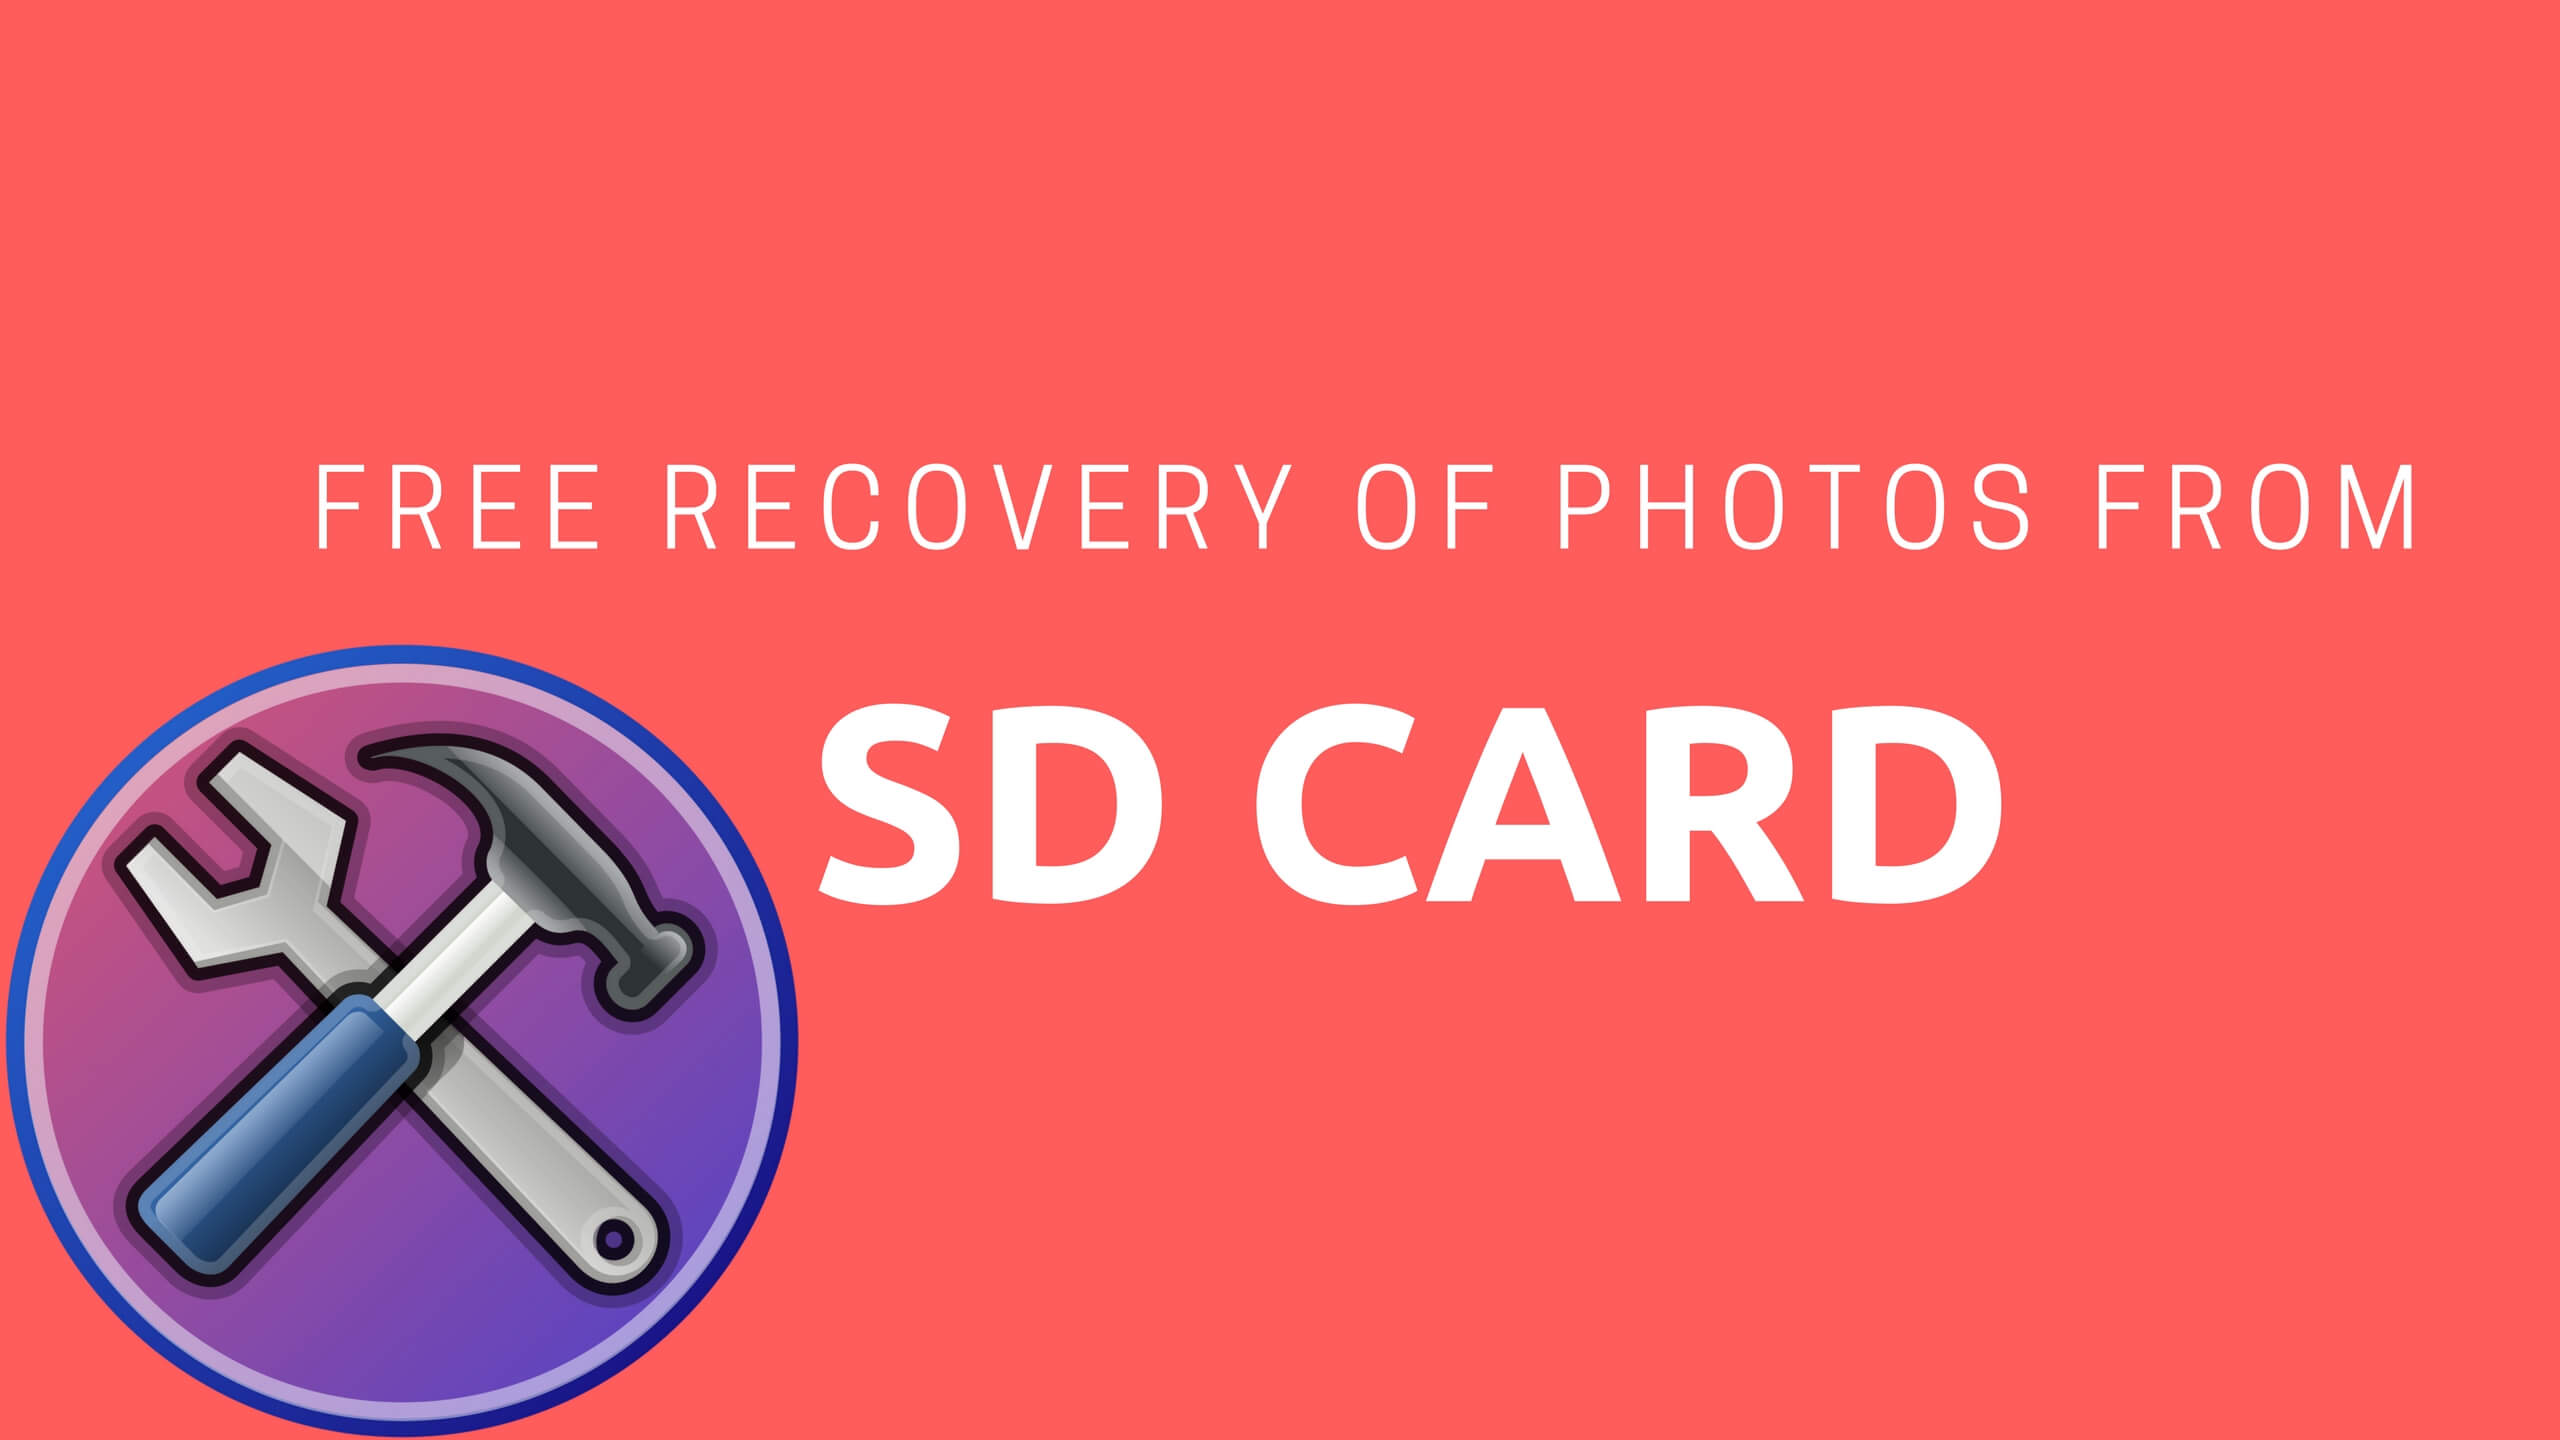 Recover Photos From Sd Card Free - Graphic Design - HD Wallpaper 